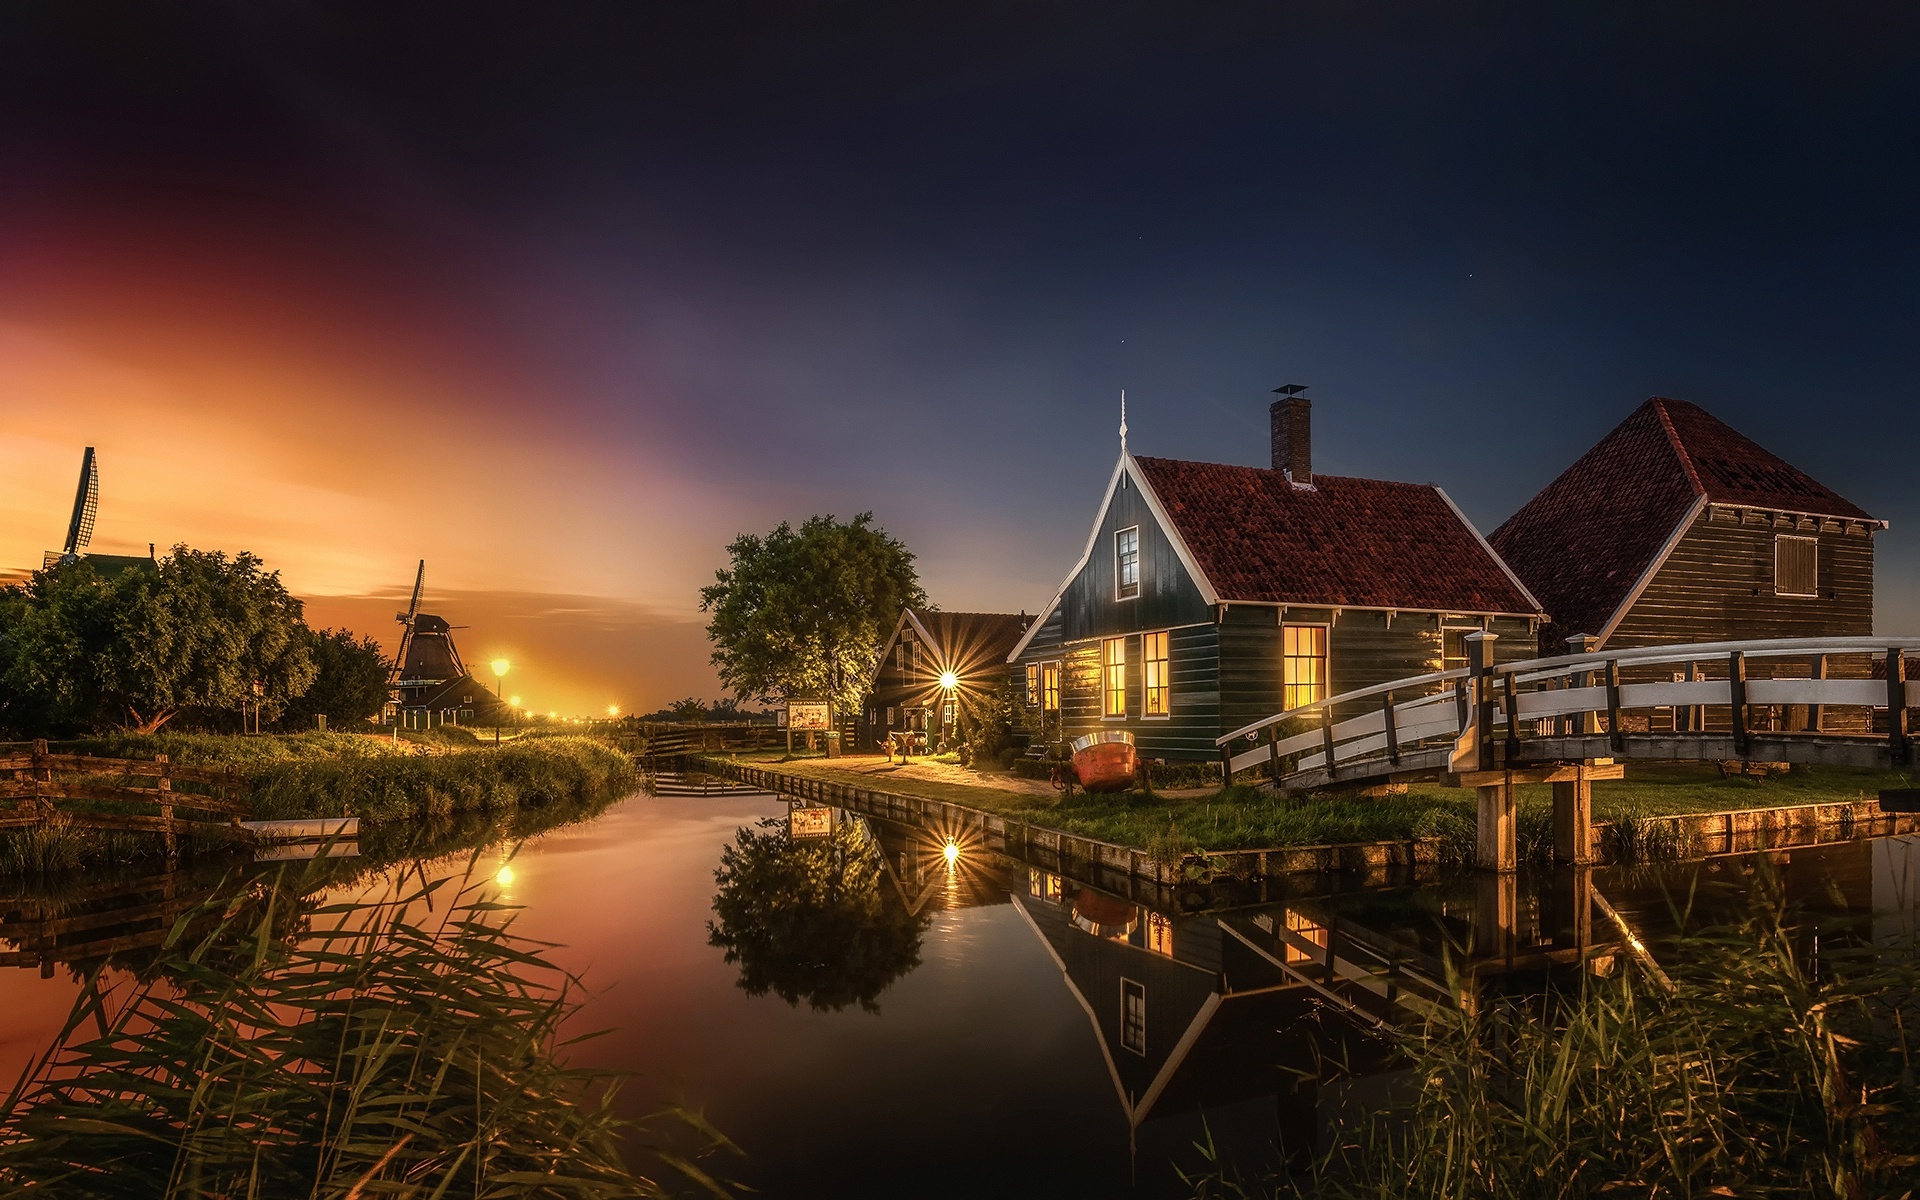 Villages Sunset HDR Lights Reflection Water Nature Windmill 1920x1200